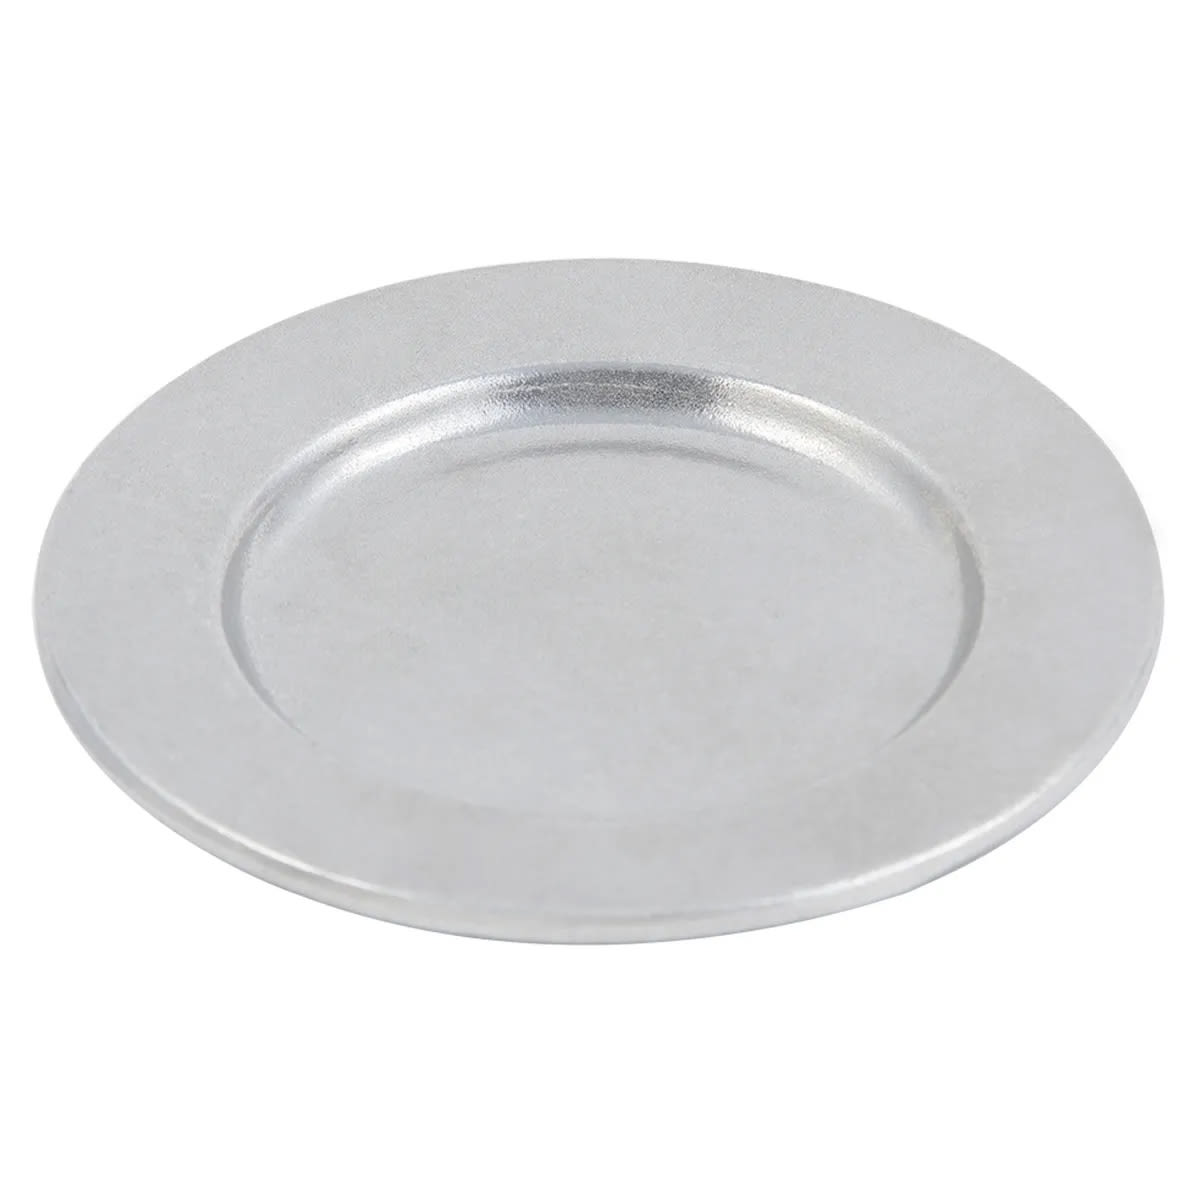 6 Diameter Pack of 12 Bon Chef 1041PG Aluminum/Pewter Glo Contemporary Bread and Butter Plate